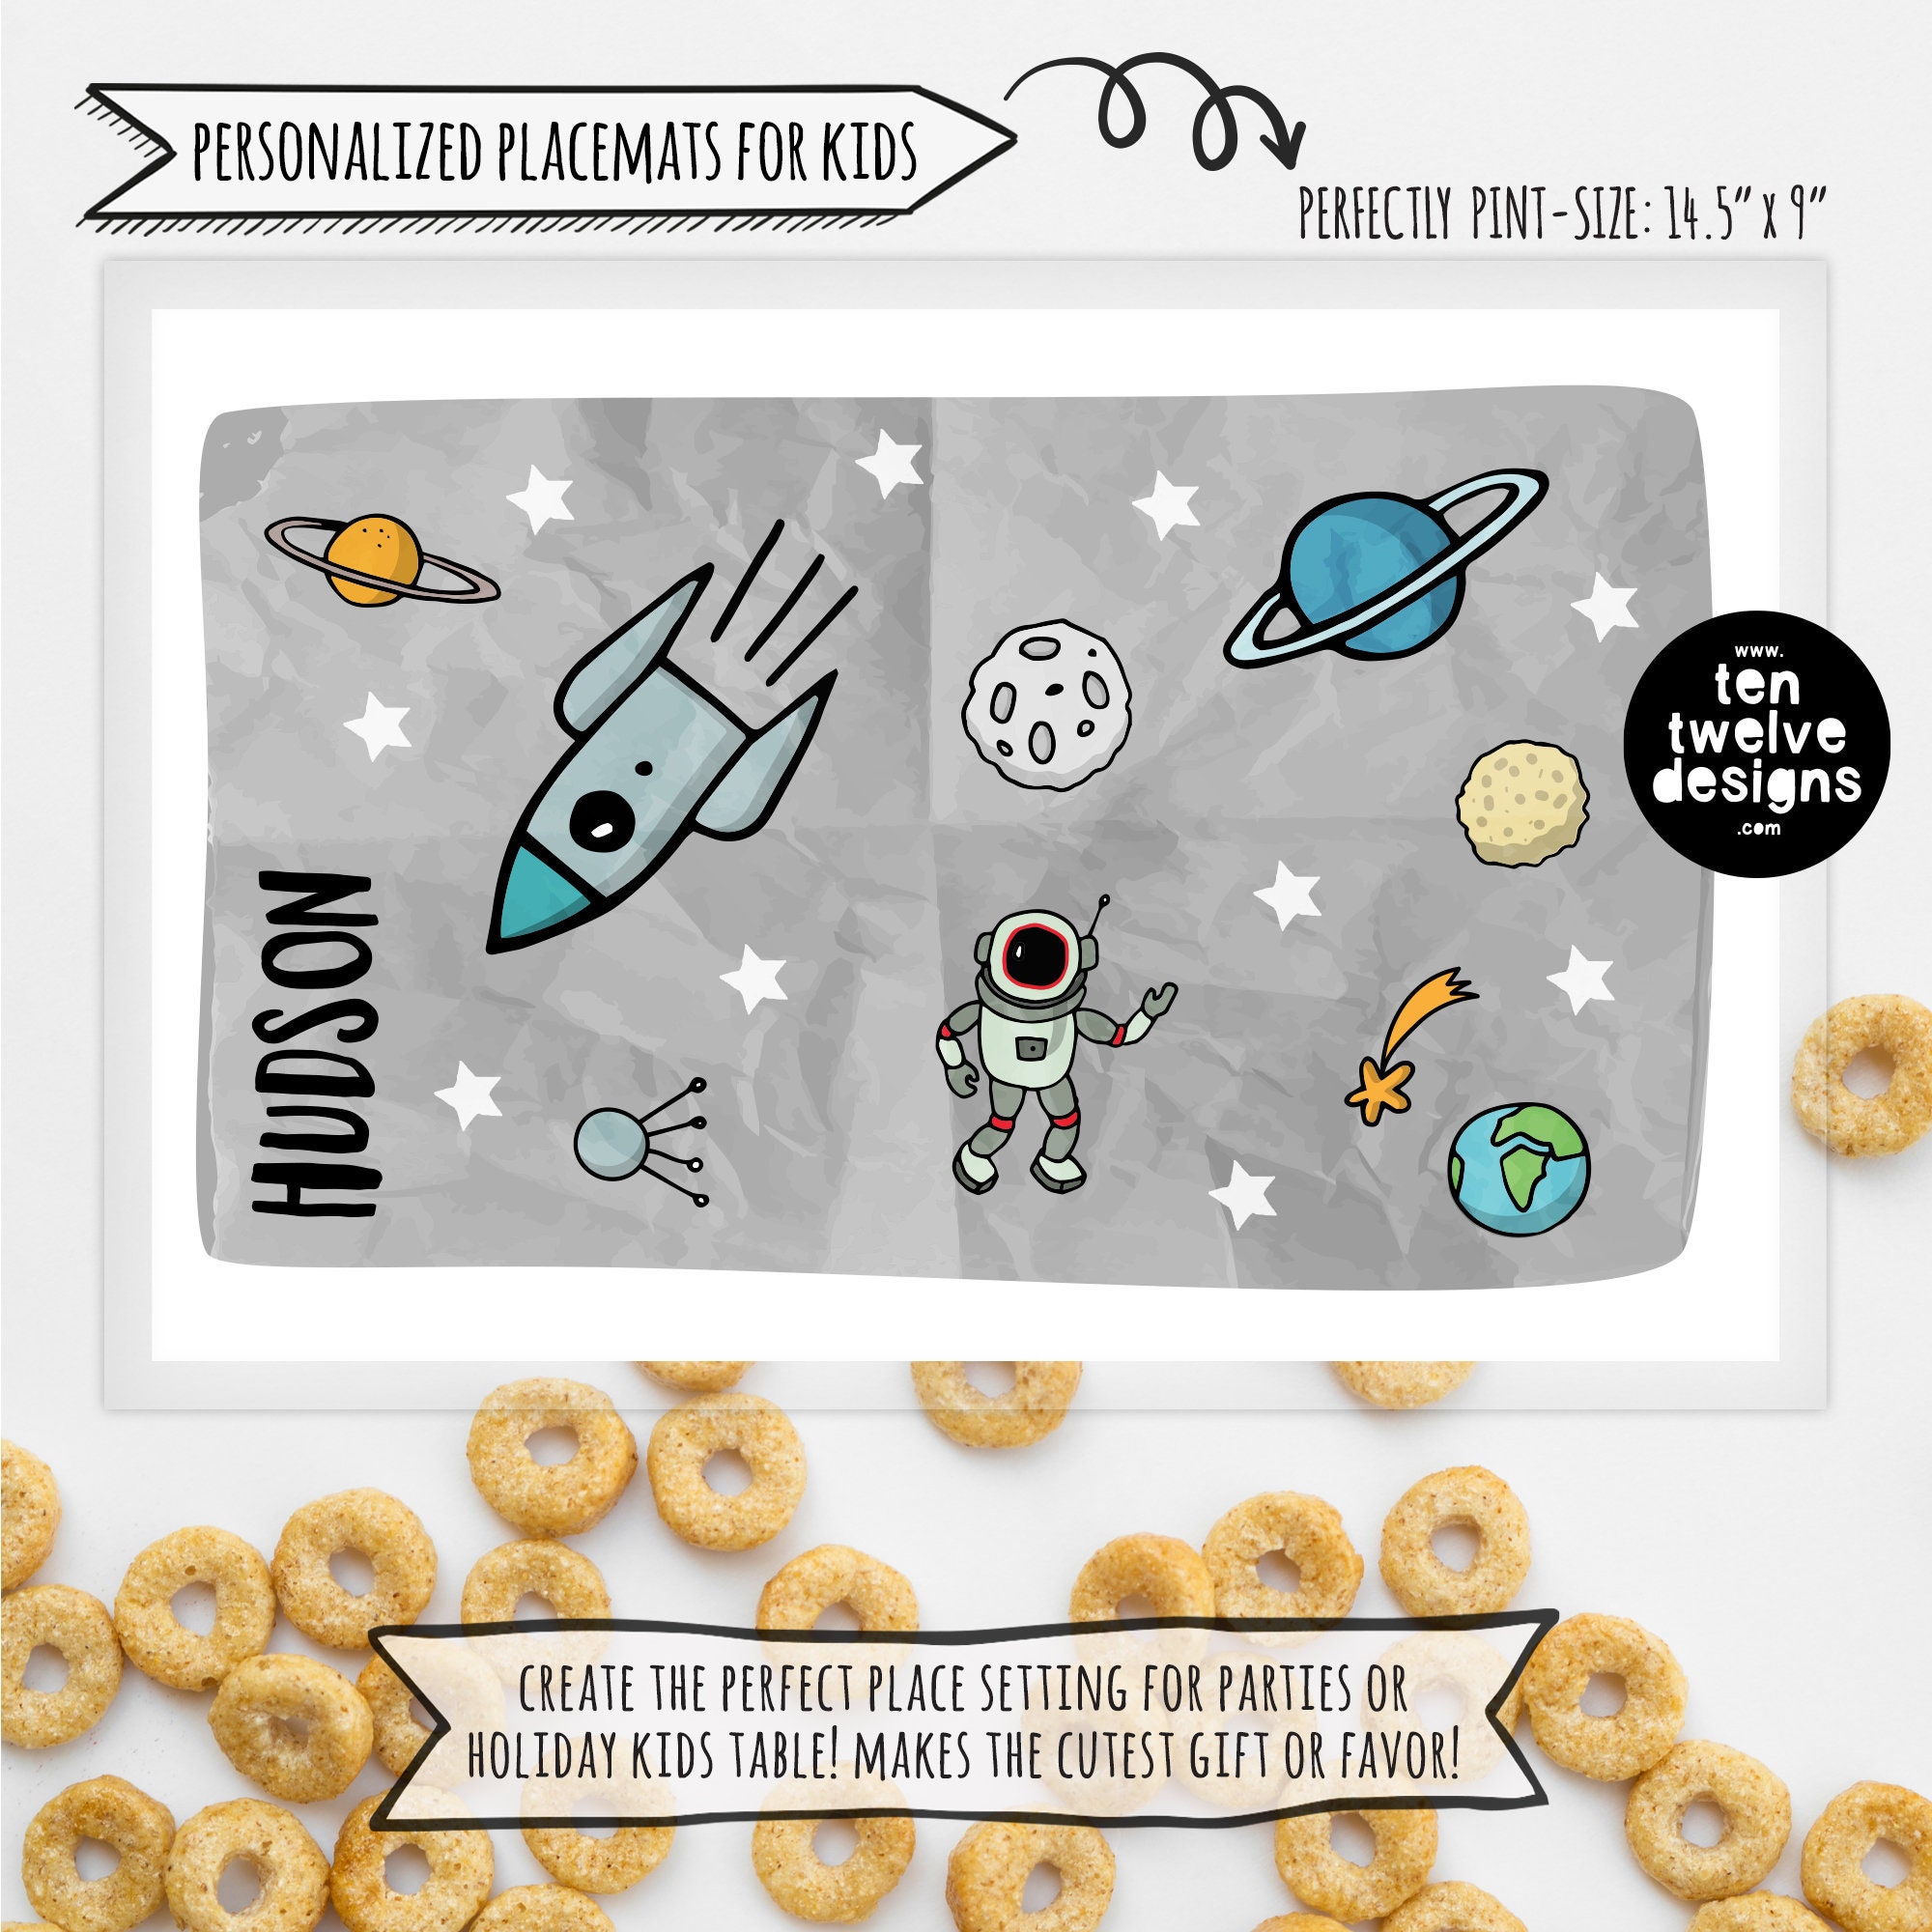 SPACE Personalized Placemat for Kids Children's